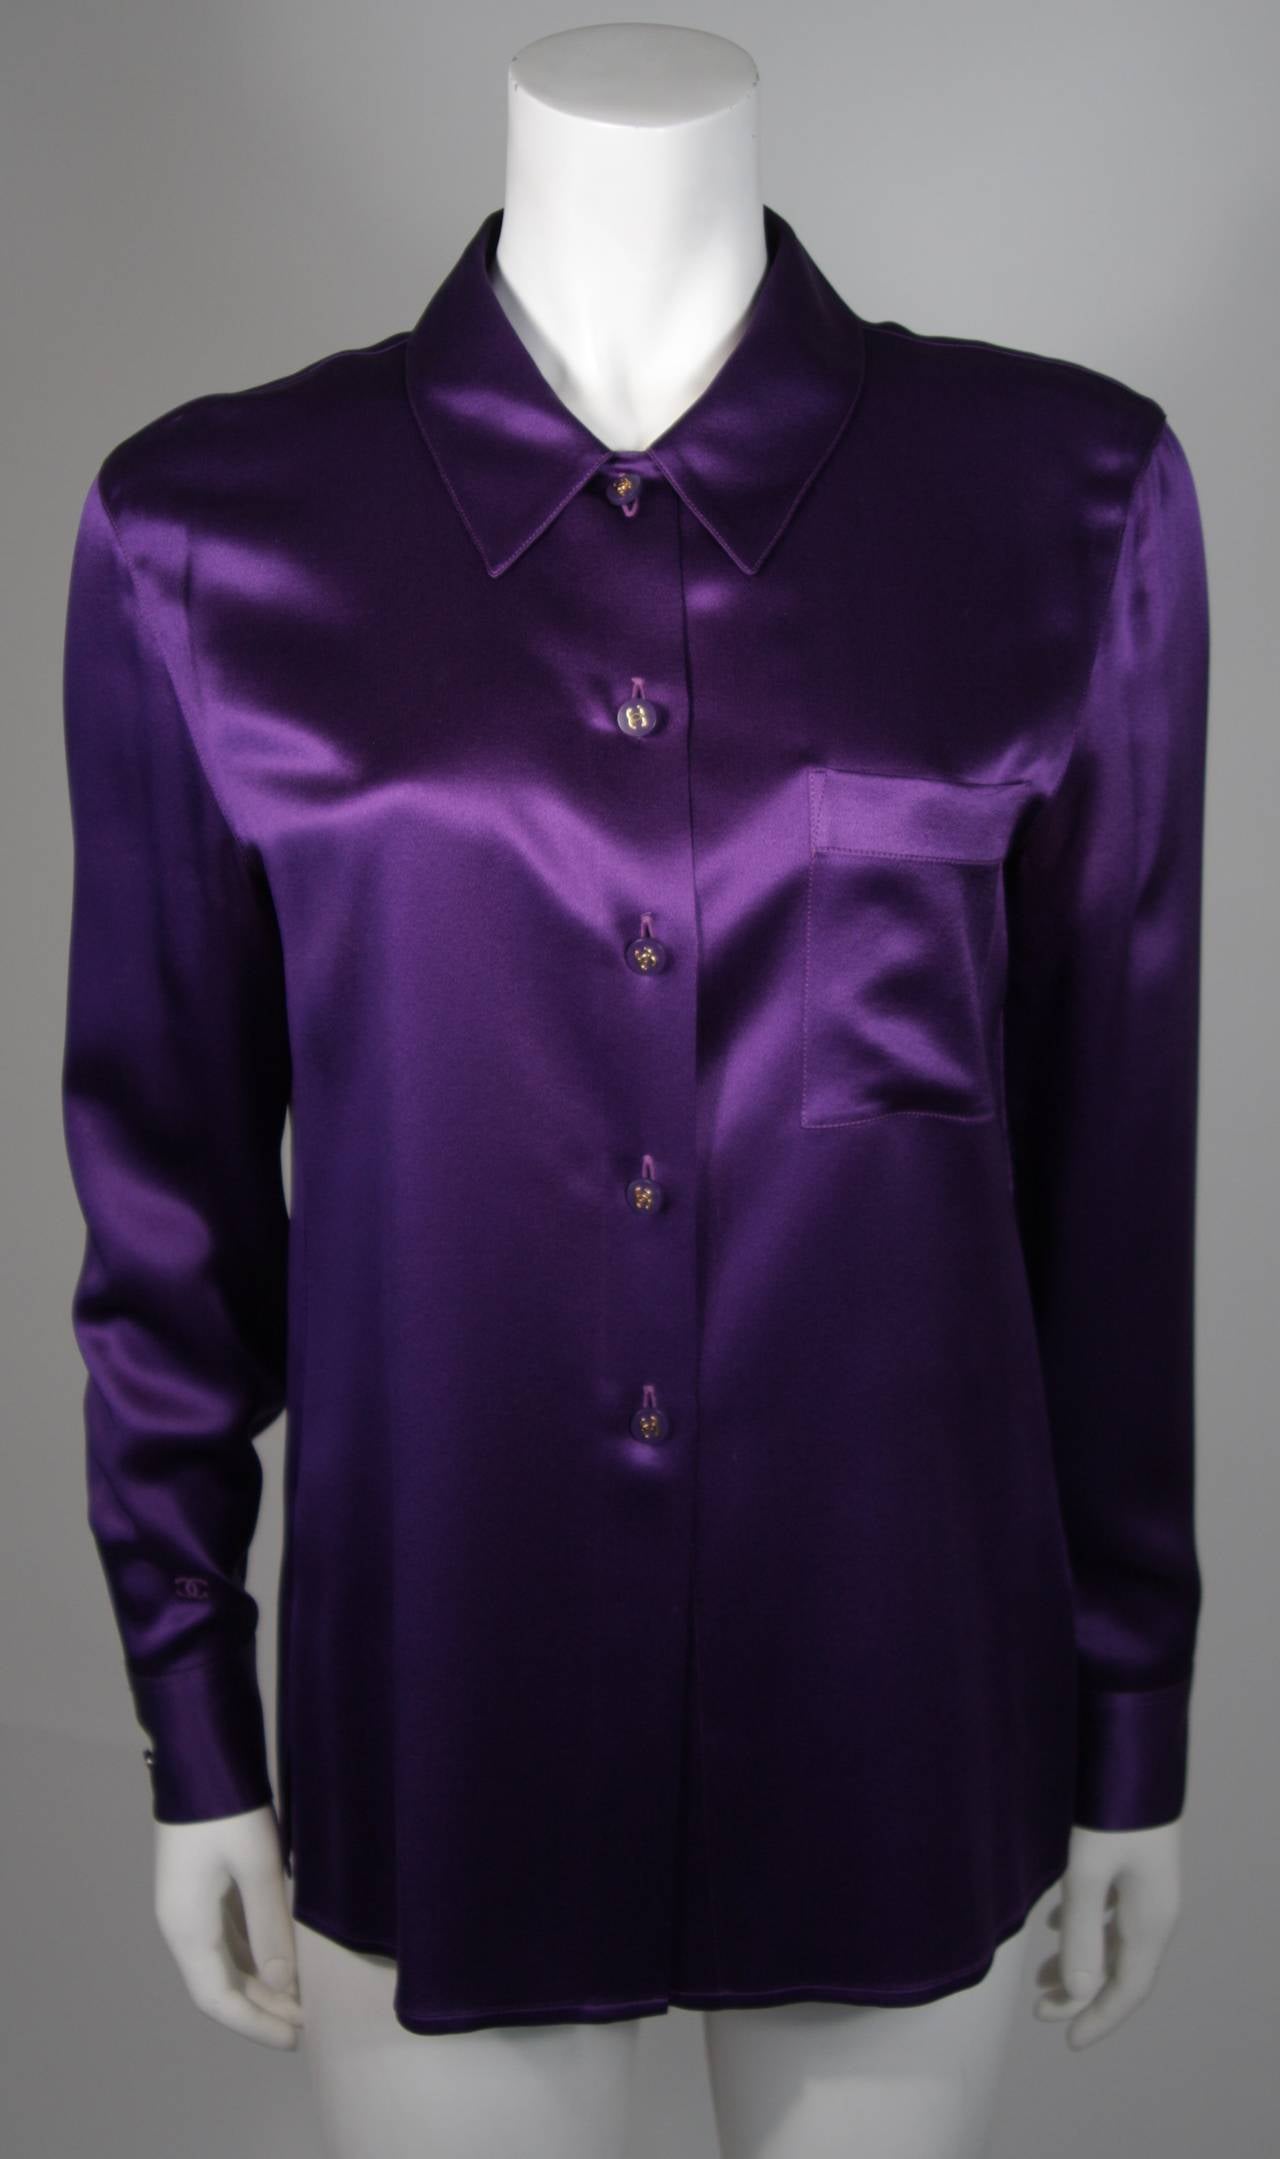 This Chanel blouse is available for viewing at our Beverly Hills Boutique. We offer a large selection of evening gowns and luxury garments.

This blouse is composed of a fine purple silk and features 